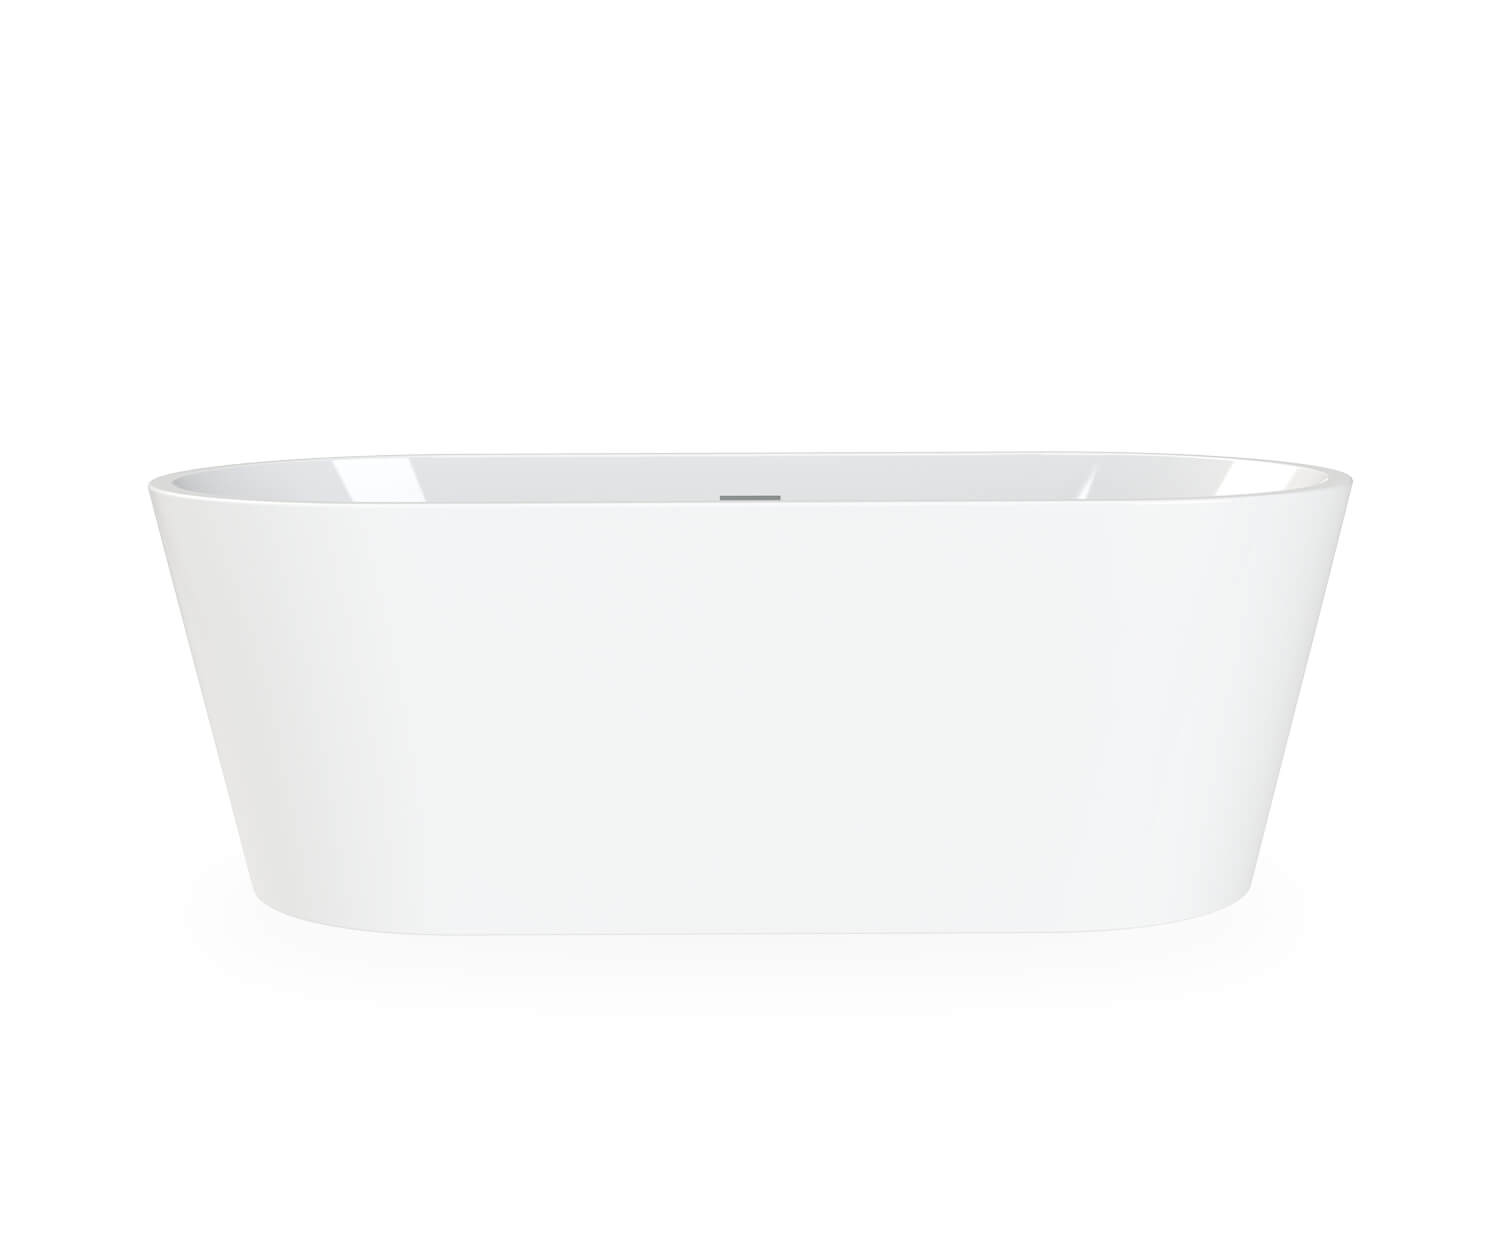 Louie 6731 Acrylic Freestanding Center Drain Bathtub in White with 